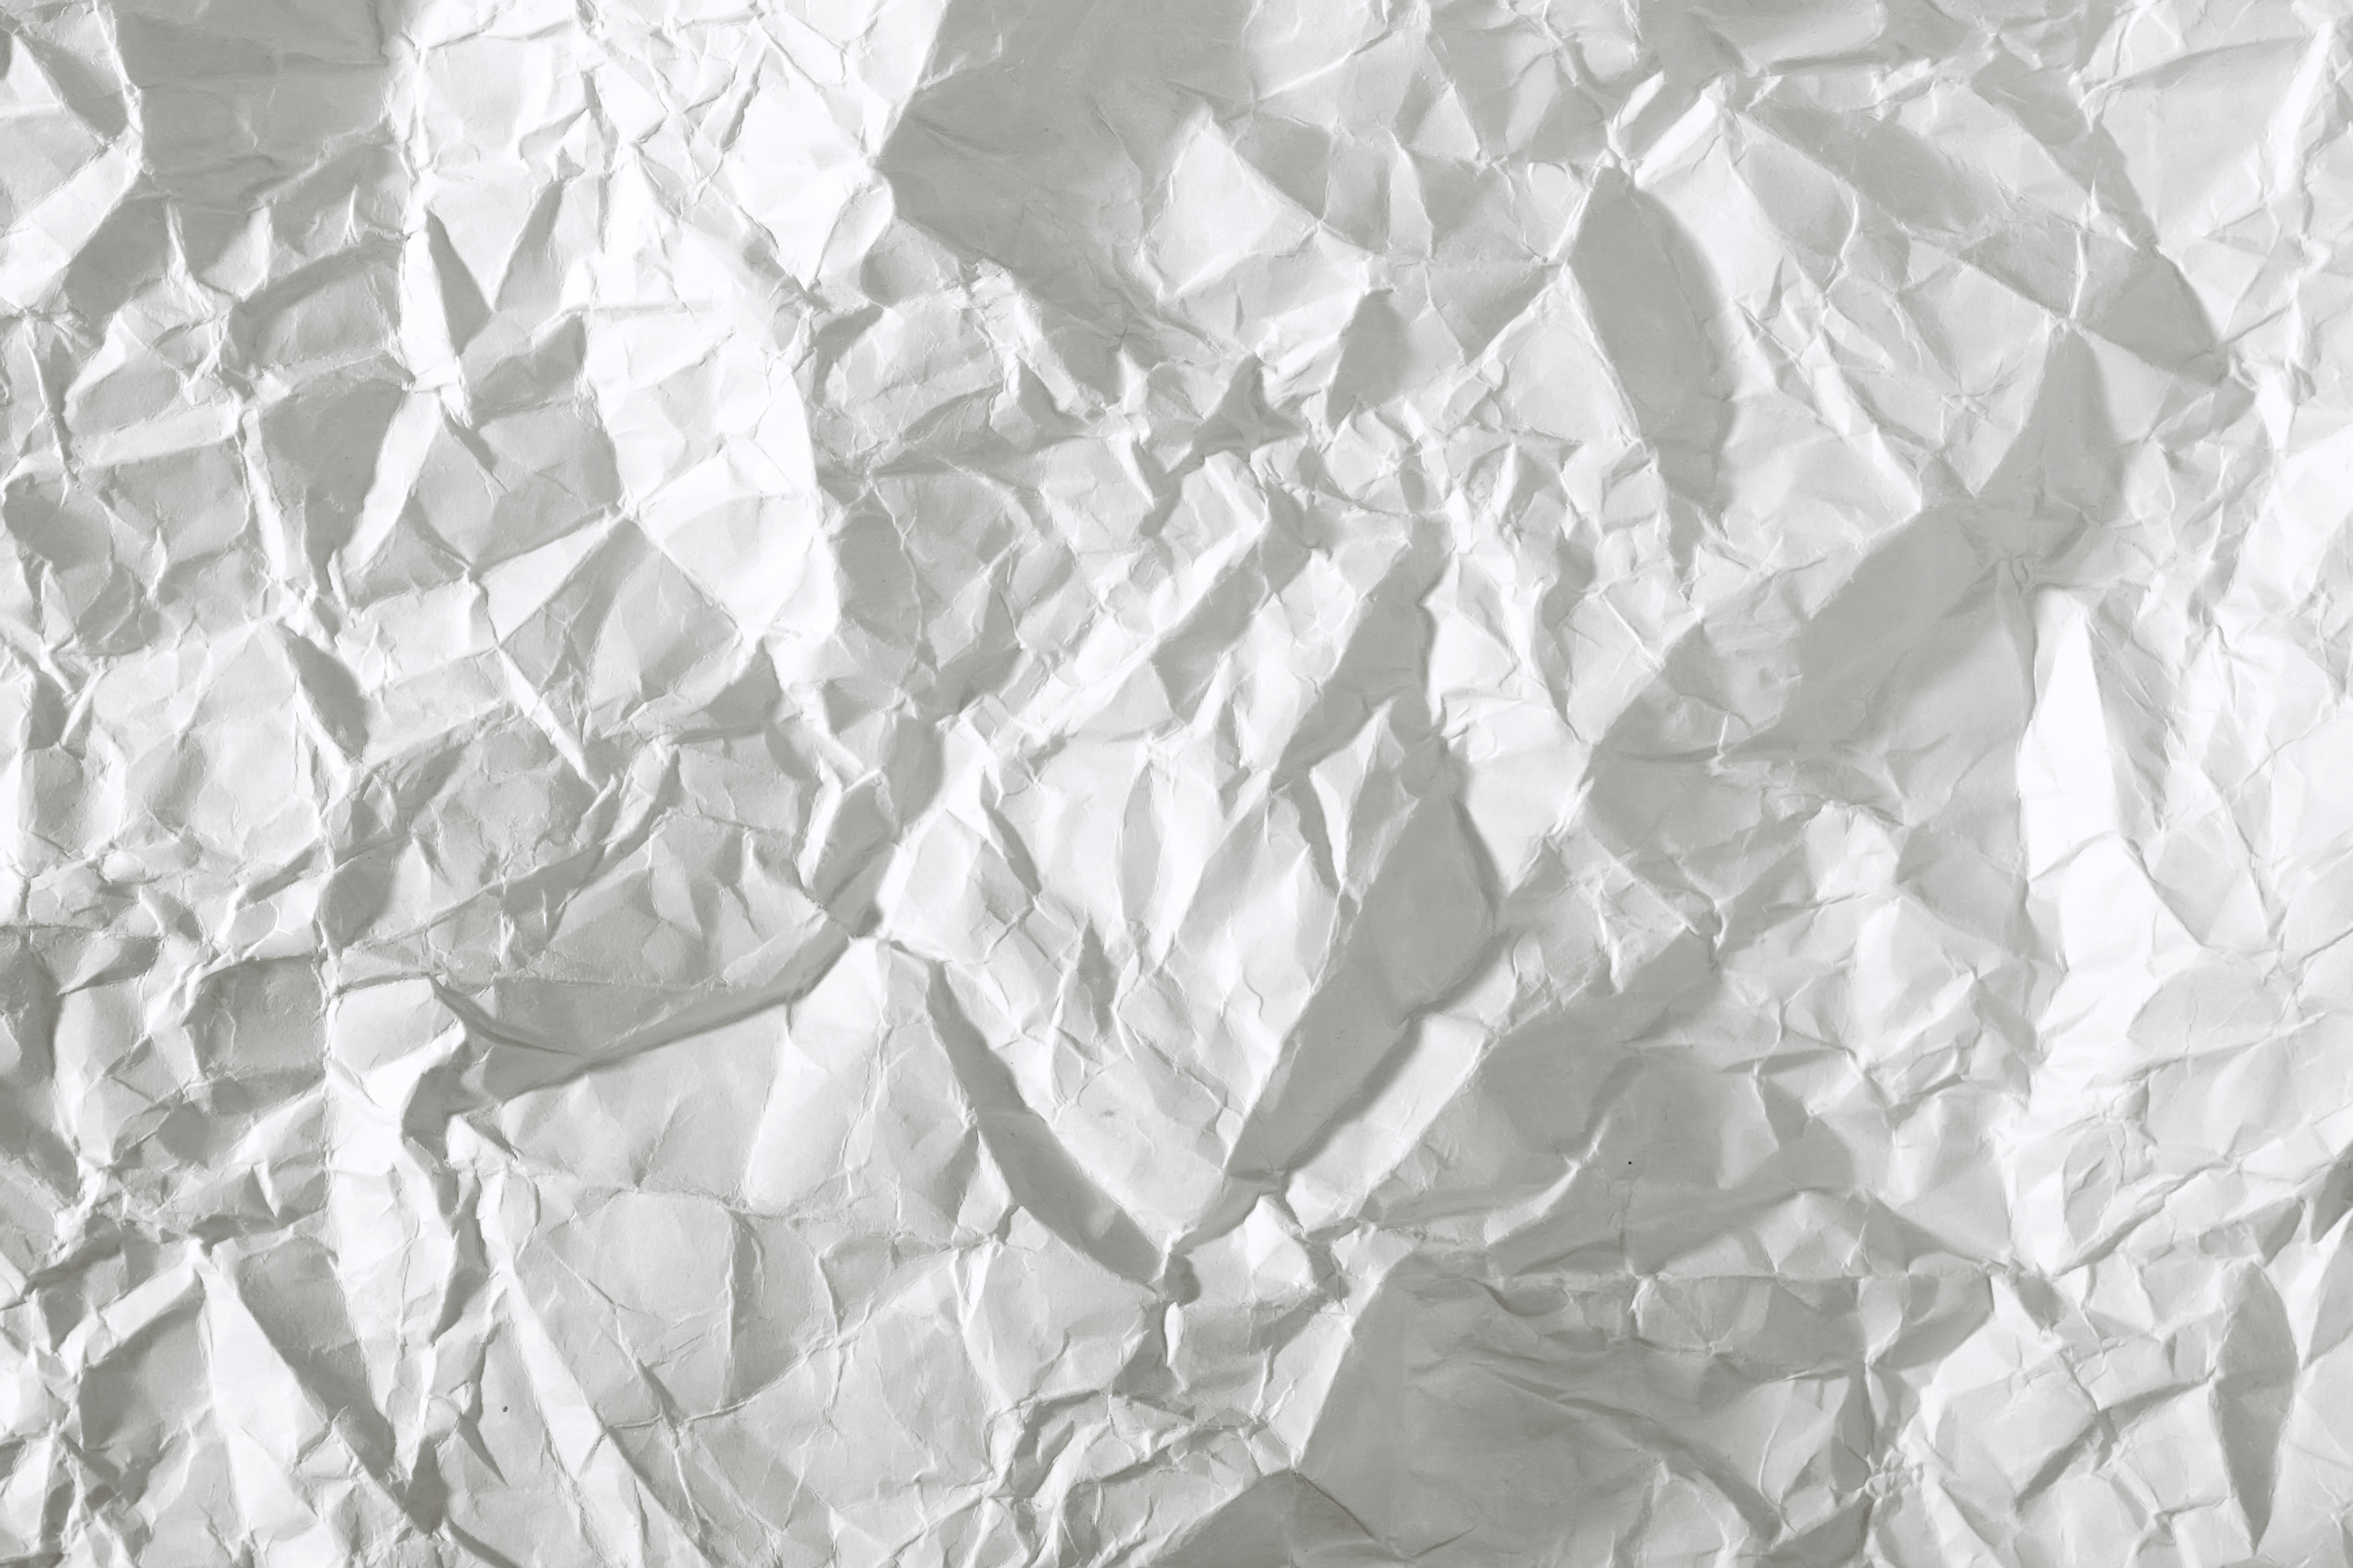 Wrinkled paper texture photo